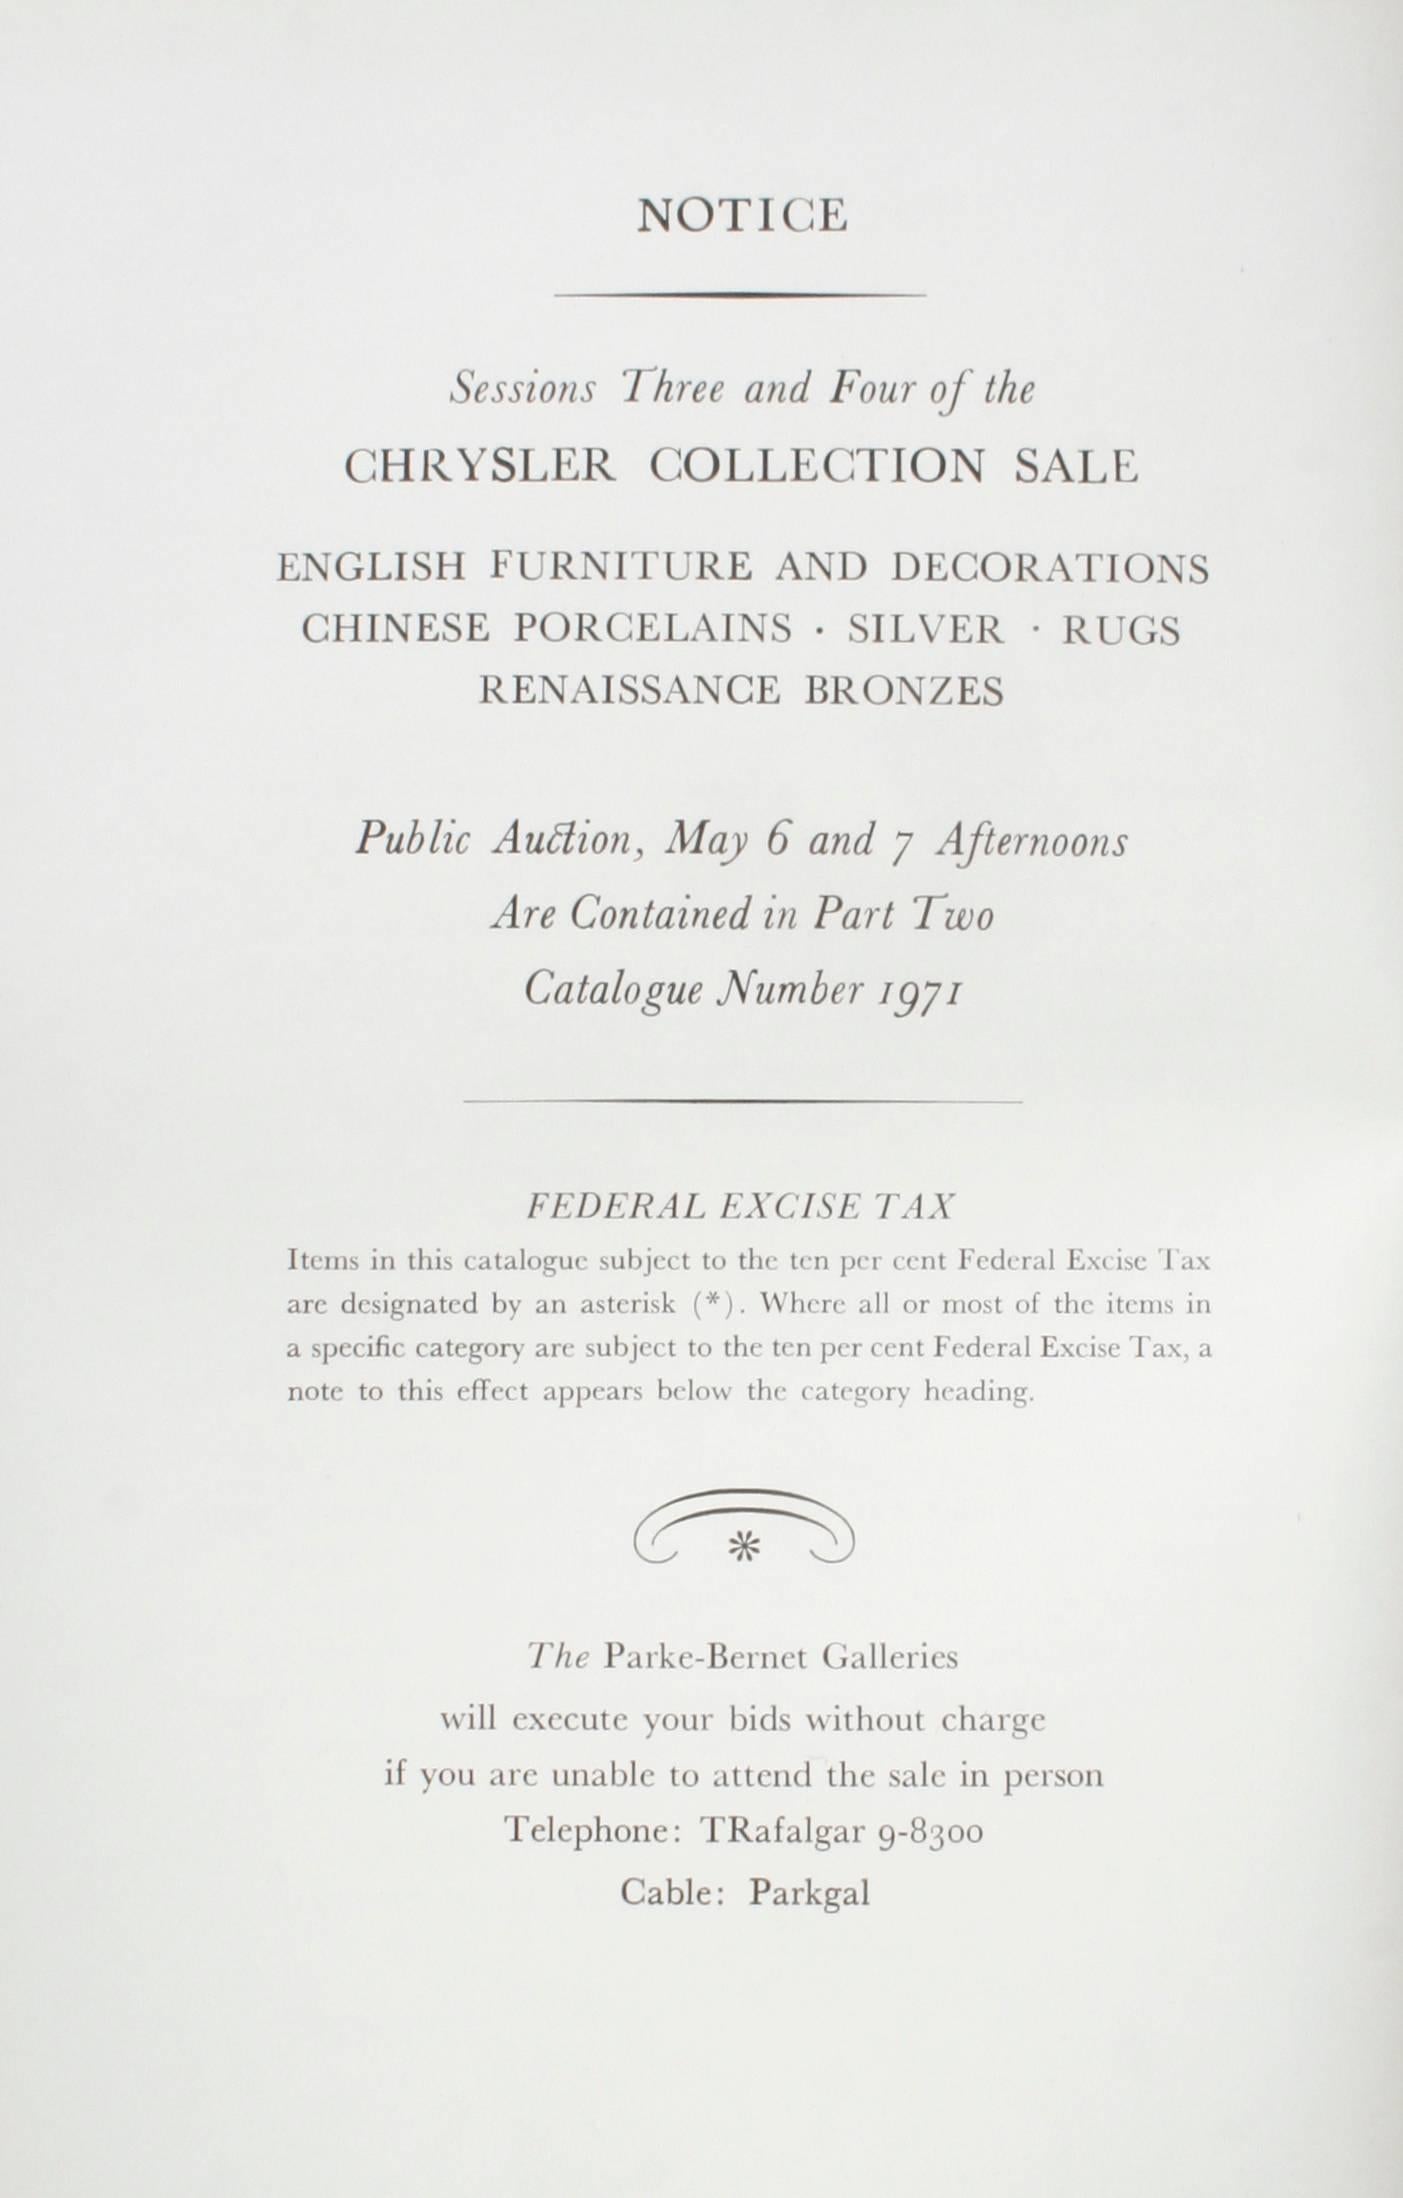 Parke Berner Galleries: The Walter P. Chrysler Jr. Collection of English Furniture Part One. New York: Parke-Bernet Galleries, Inc., 1960. First edition hardcover with no dust jacket as issued. An auction catalogue of magnificent Queen Anne and